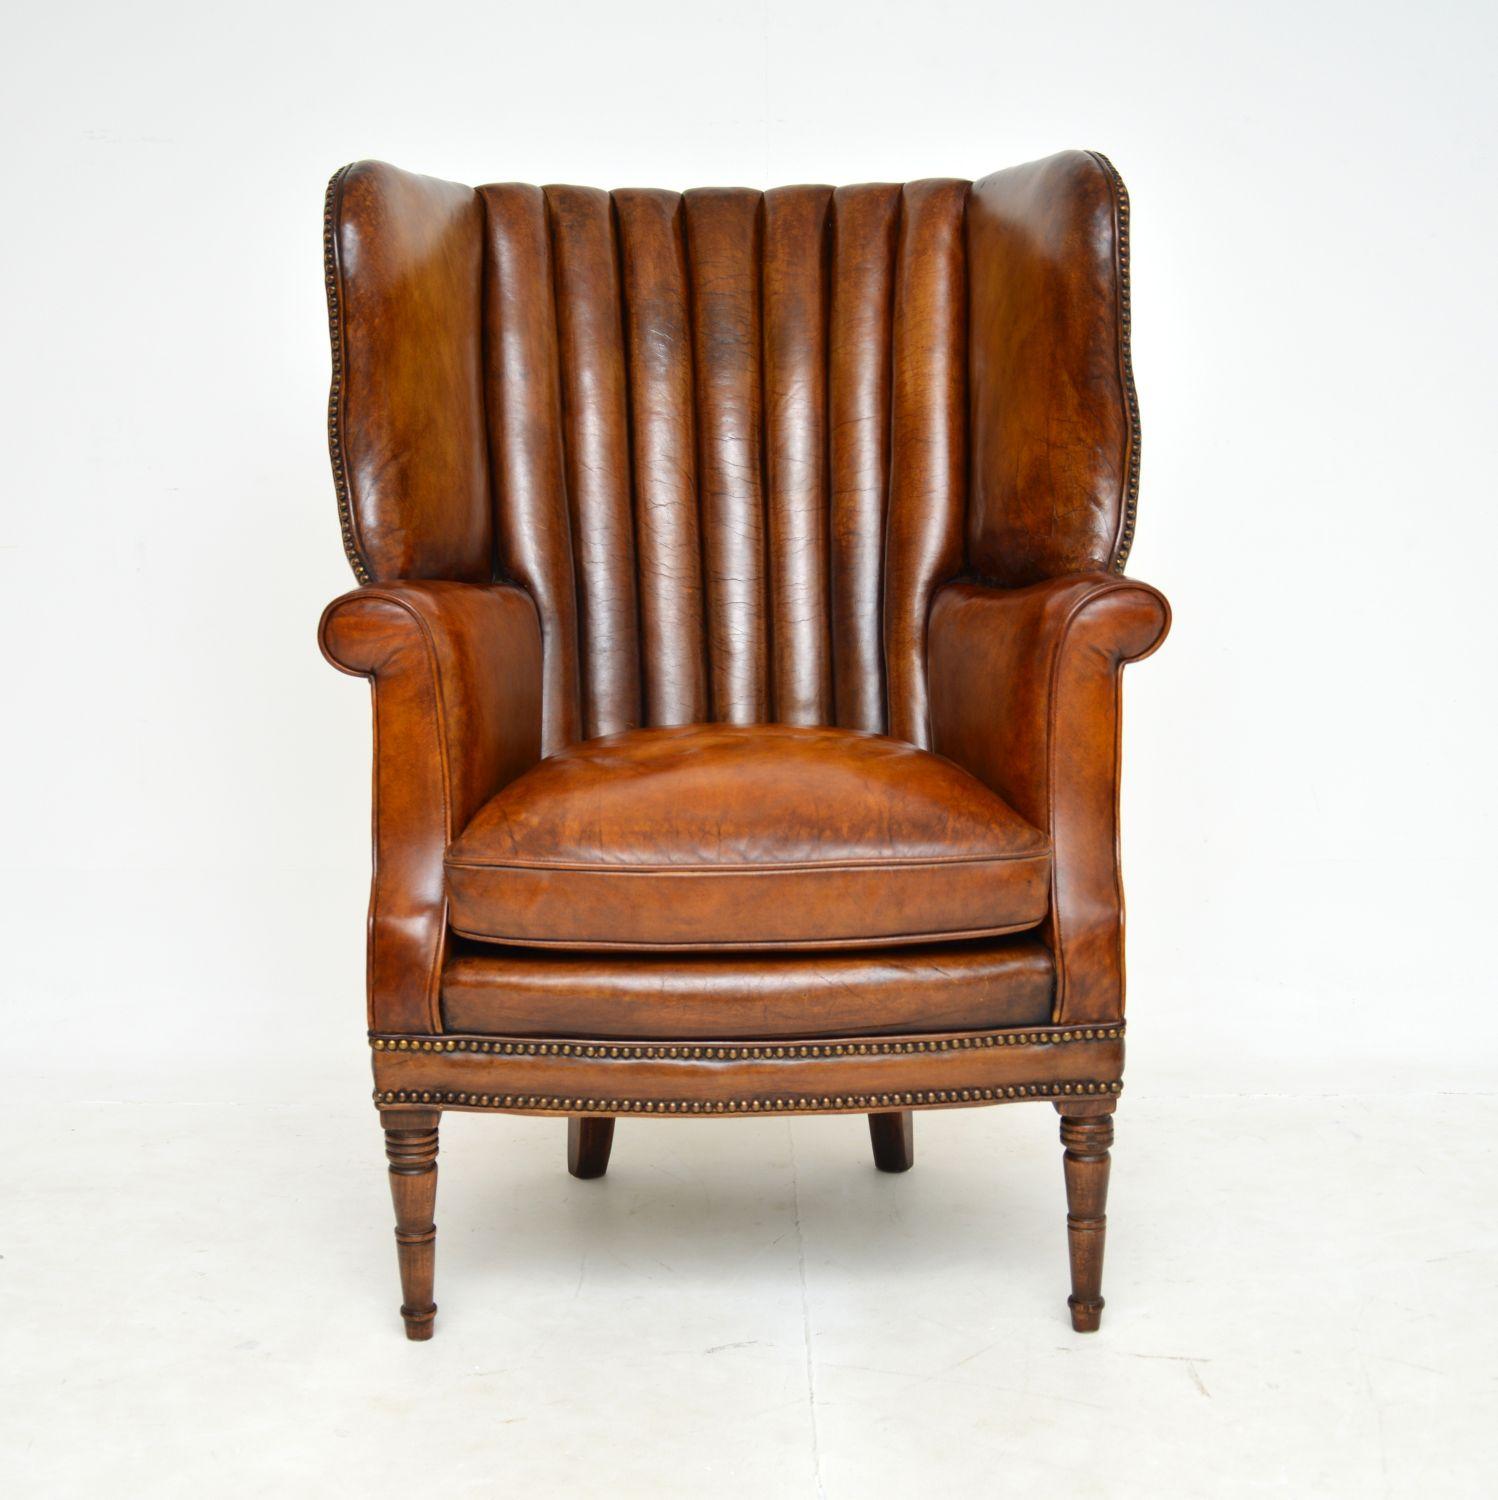 A magnificent antique Georgian period ribbed barrel back armchair in leather. This was made in England & we would date it from around the 1790-1810 period.

This is an incredibly fine example, the quality is superb and it is very comfortable. The